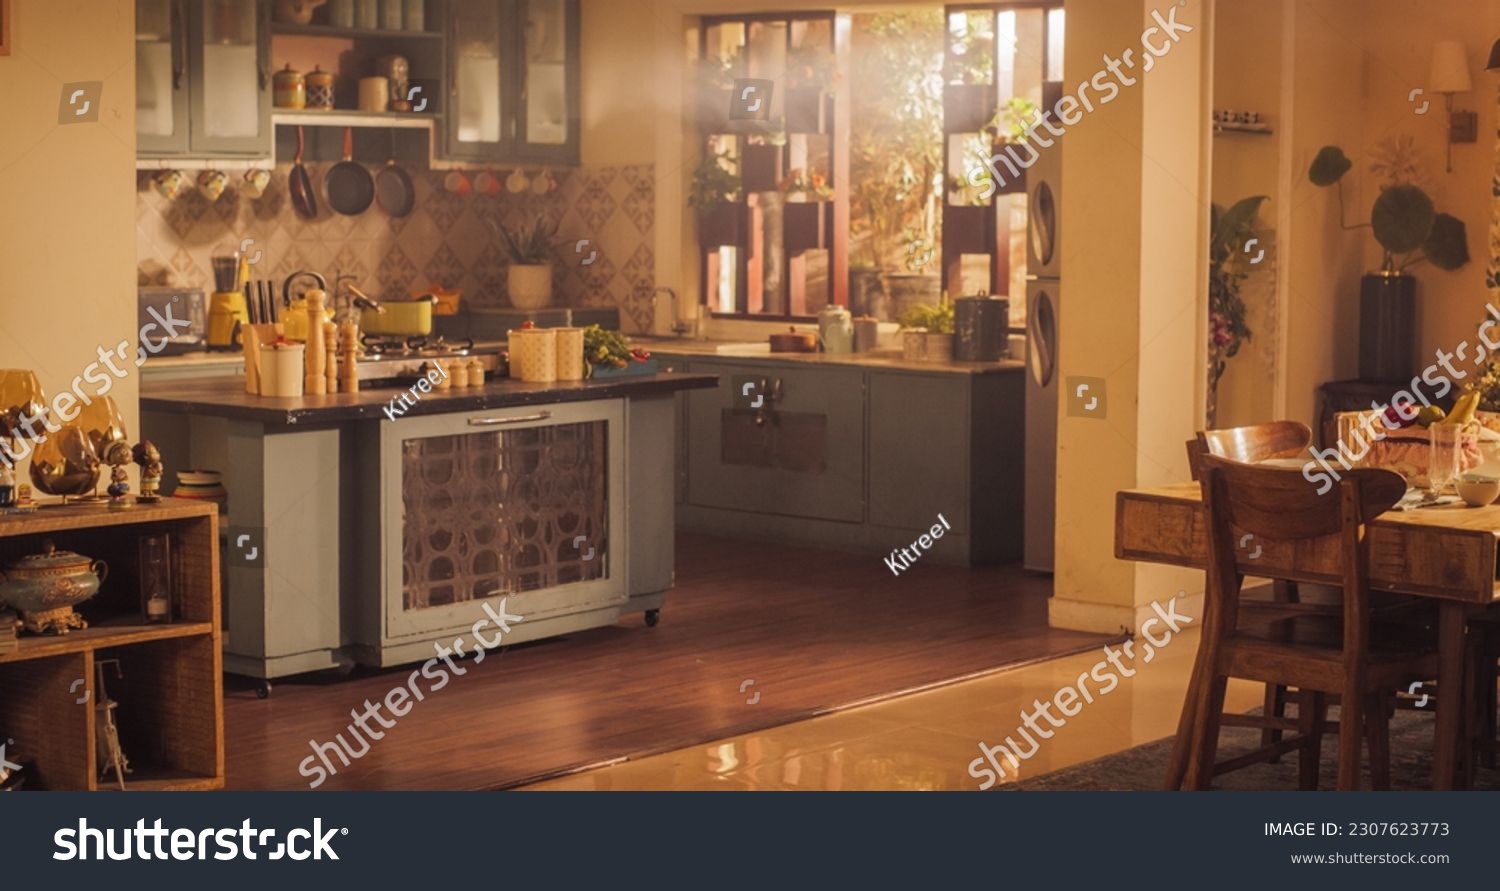 Wide Shot of an Empty Cosy Kitchen Decorated with Indian Style. Stylish Traditional South Asian Home with Utensils and Wide Window Letting the Spring Warmth and Light in. Vintage Warm Aesthetic #2307623773